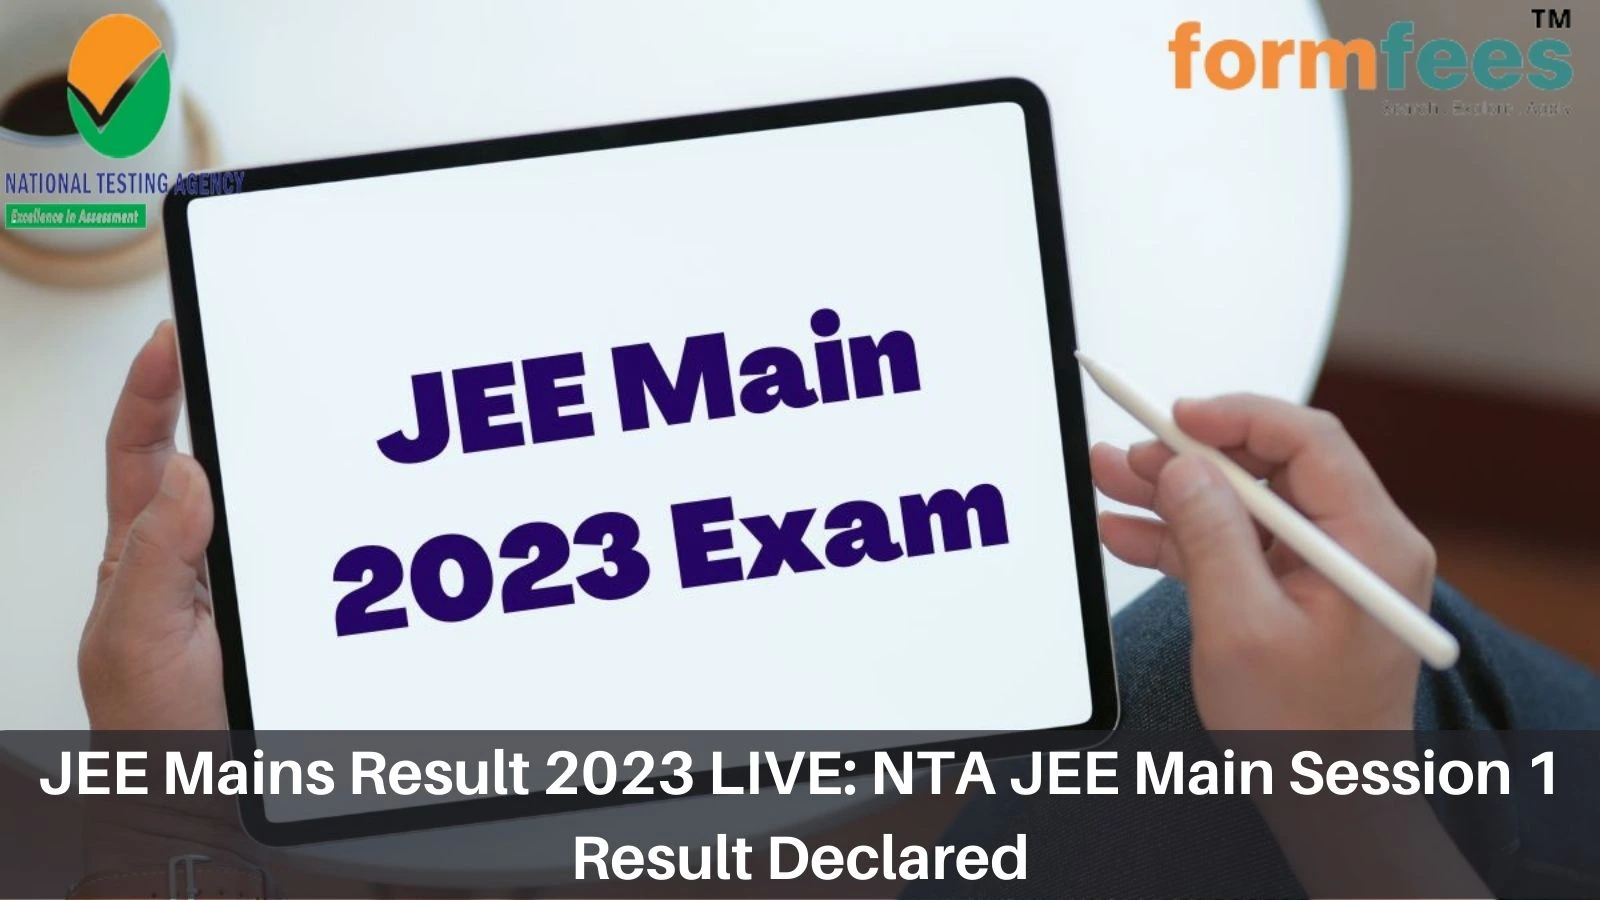 JEE Mains Result 2023 LIVE: NTA JEE Main Session 1 Result Declared